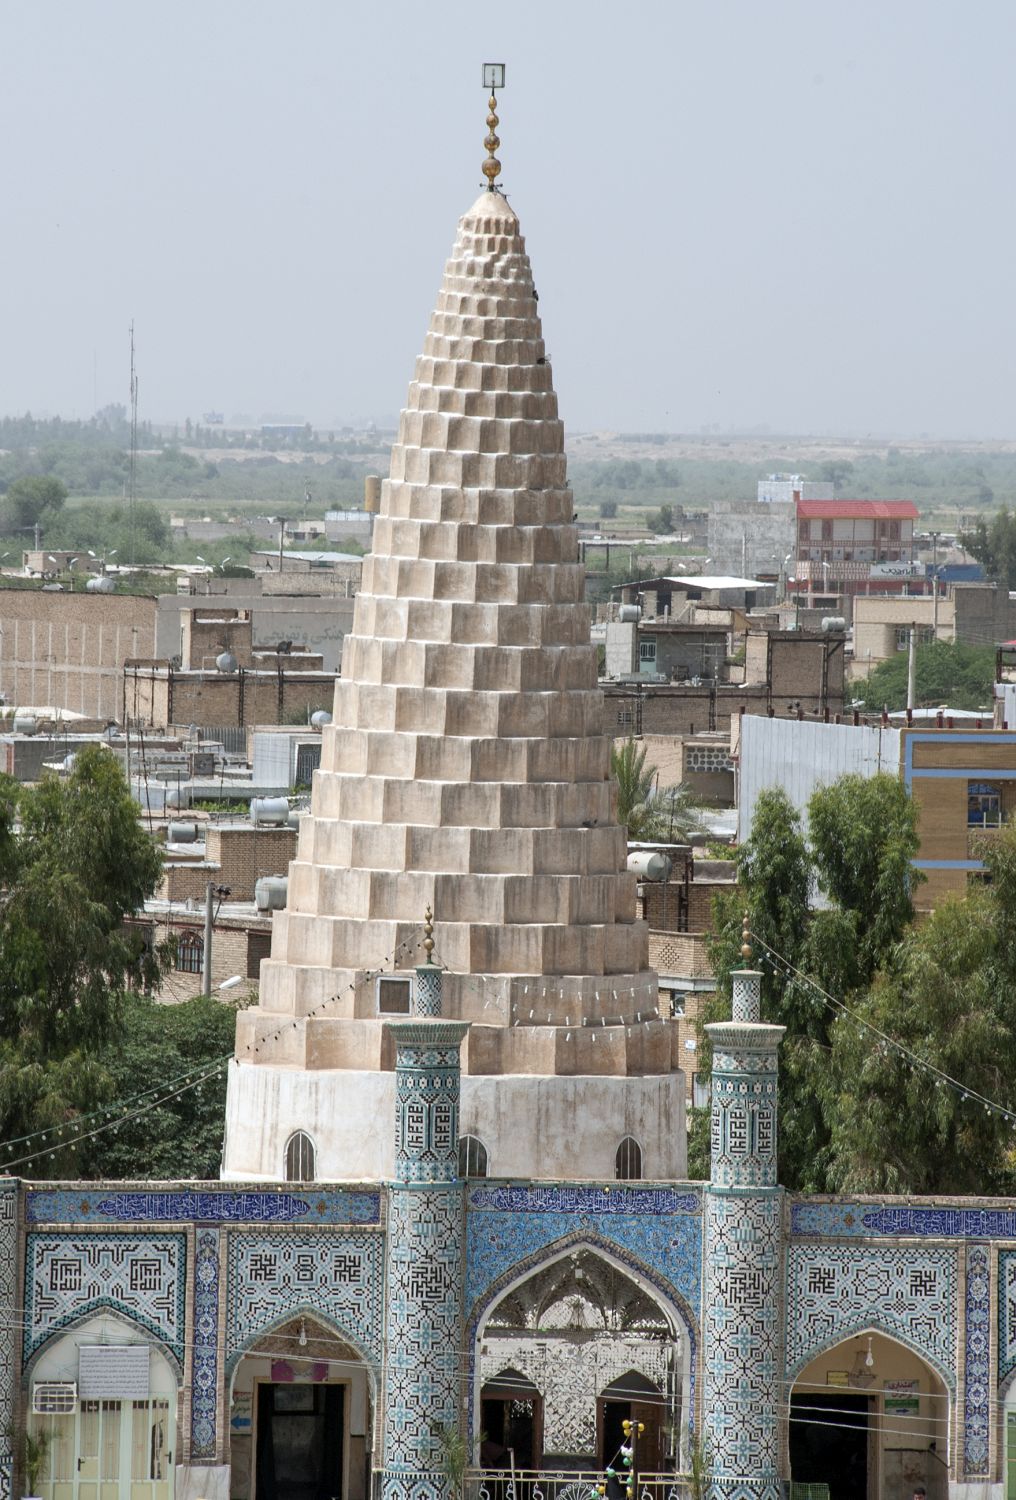 View of muqarnas dome over tomb chamber from a distance.